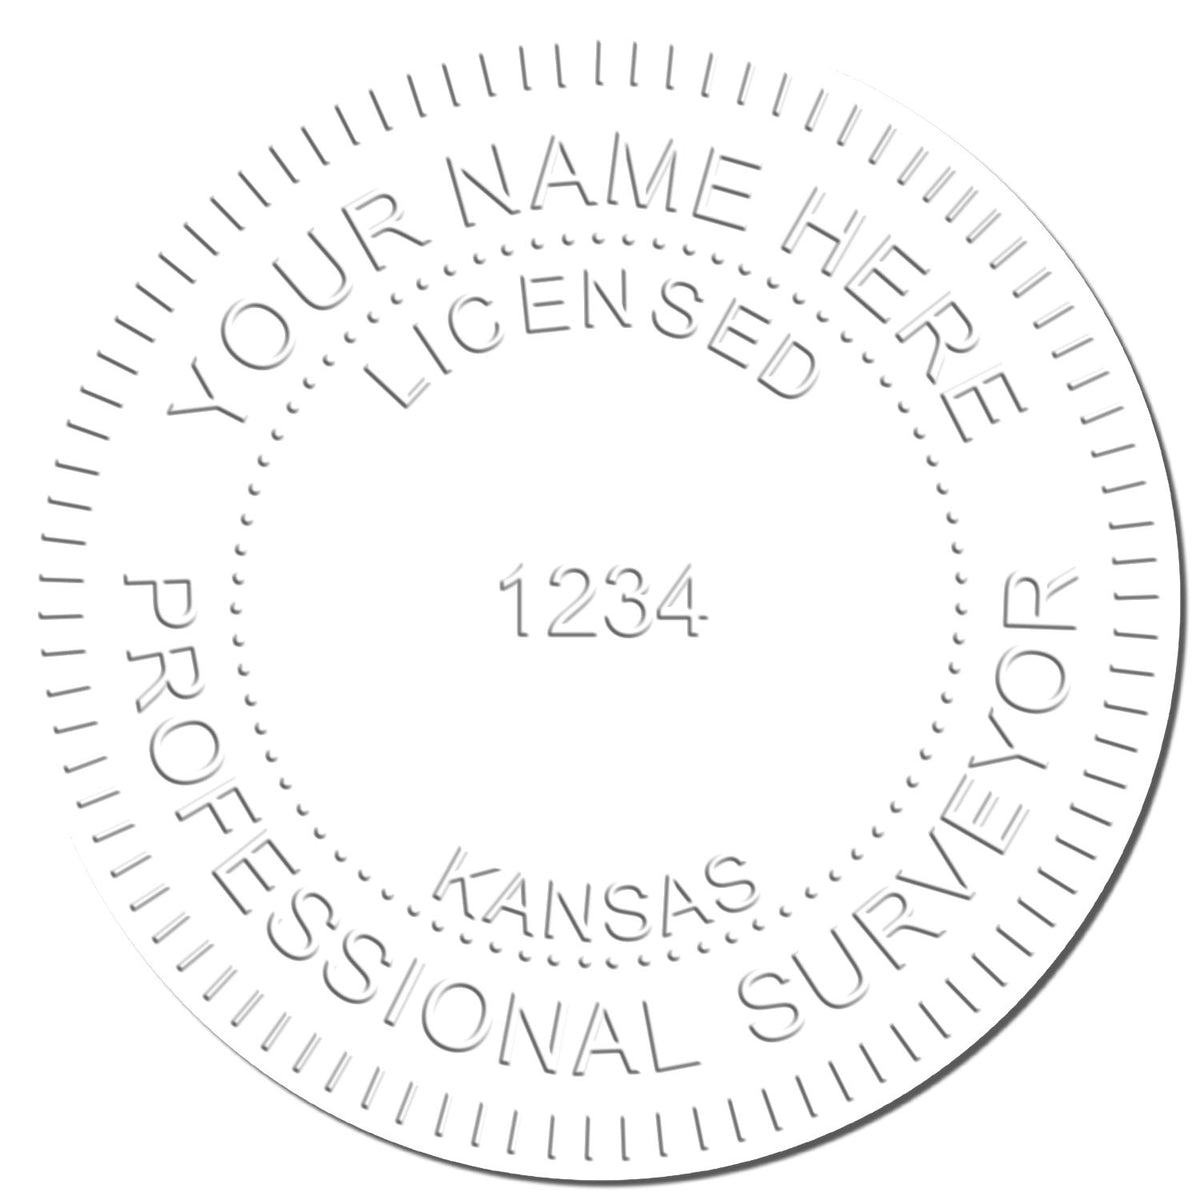 This paper is stamped with a sample imprint of the Gift Kansas Land Surveyor Seal, signifying its quality and reliability.